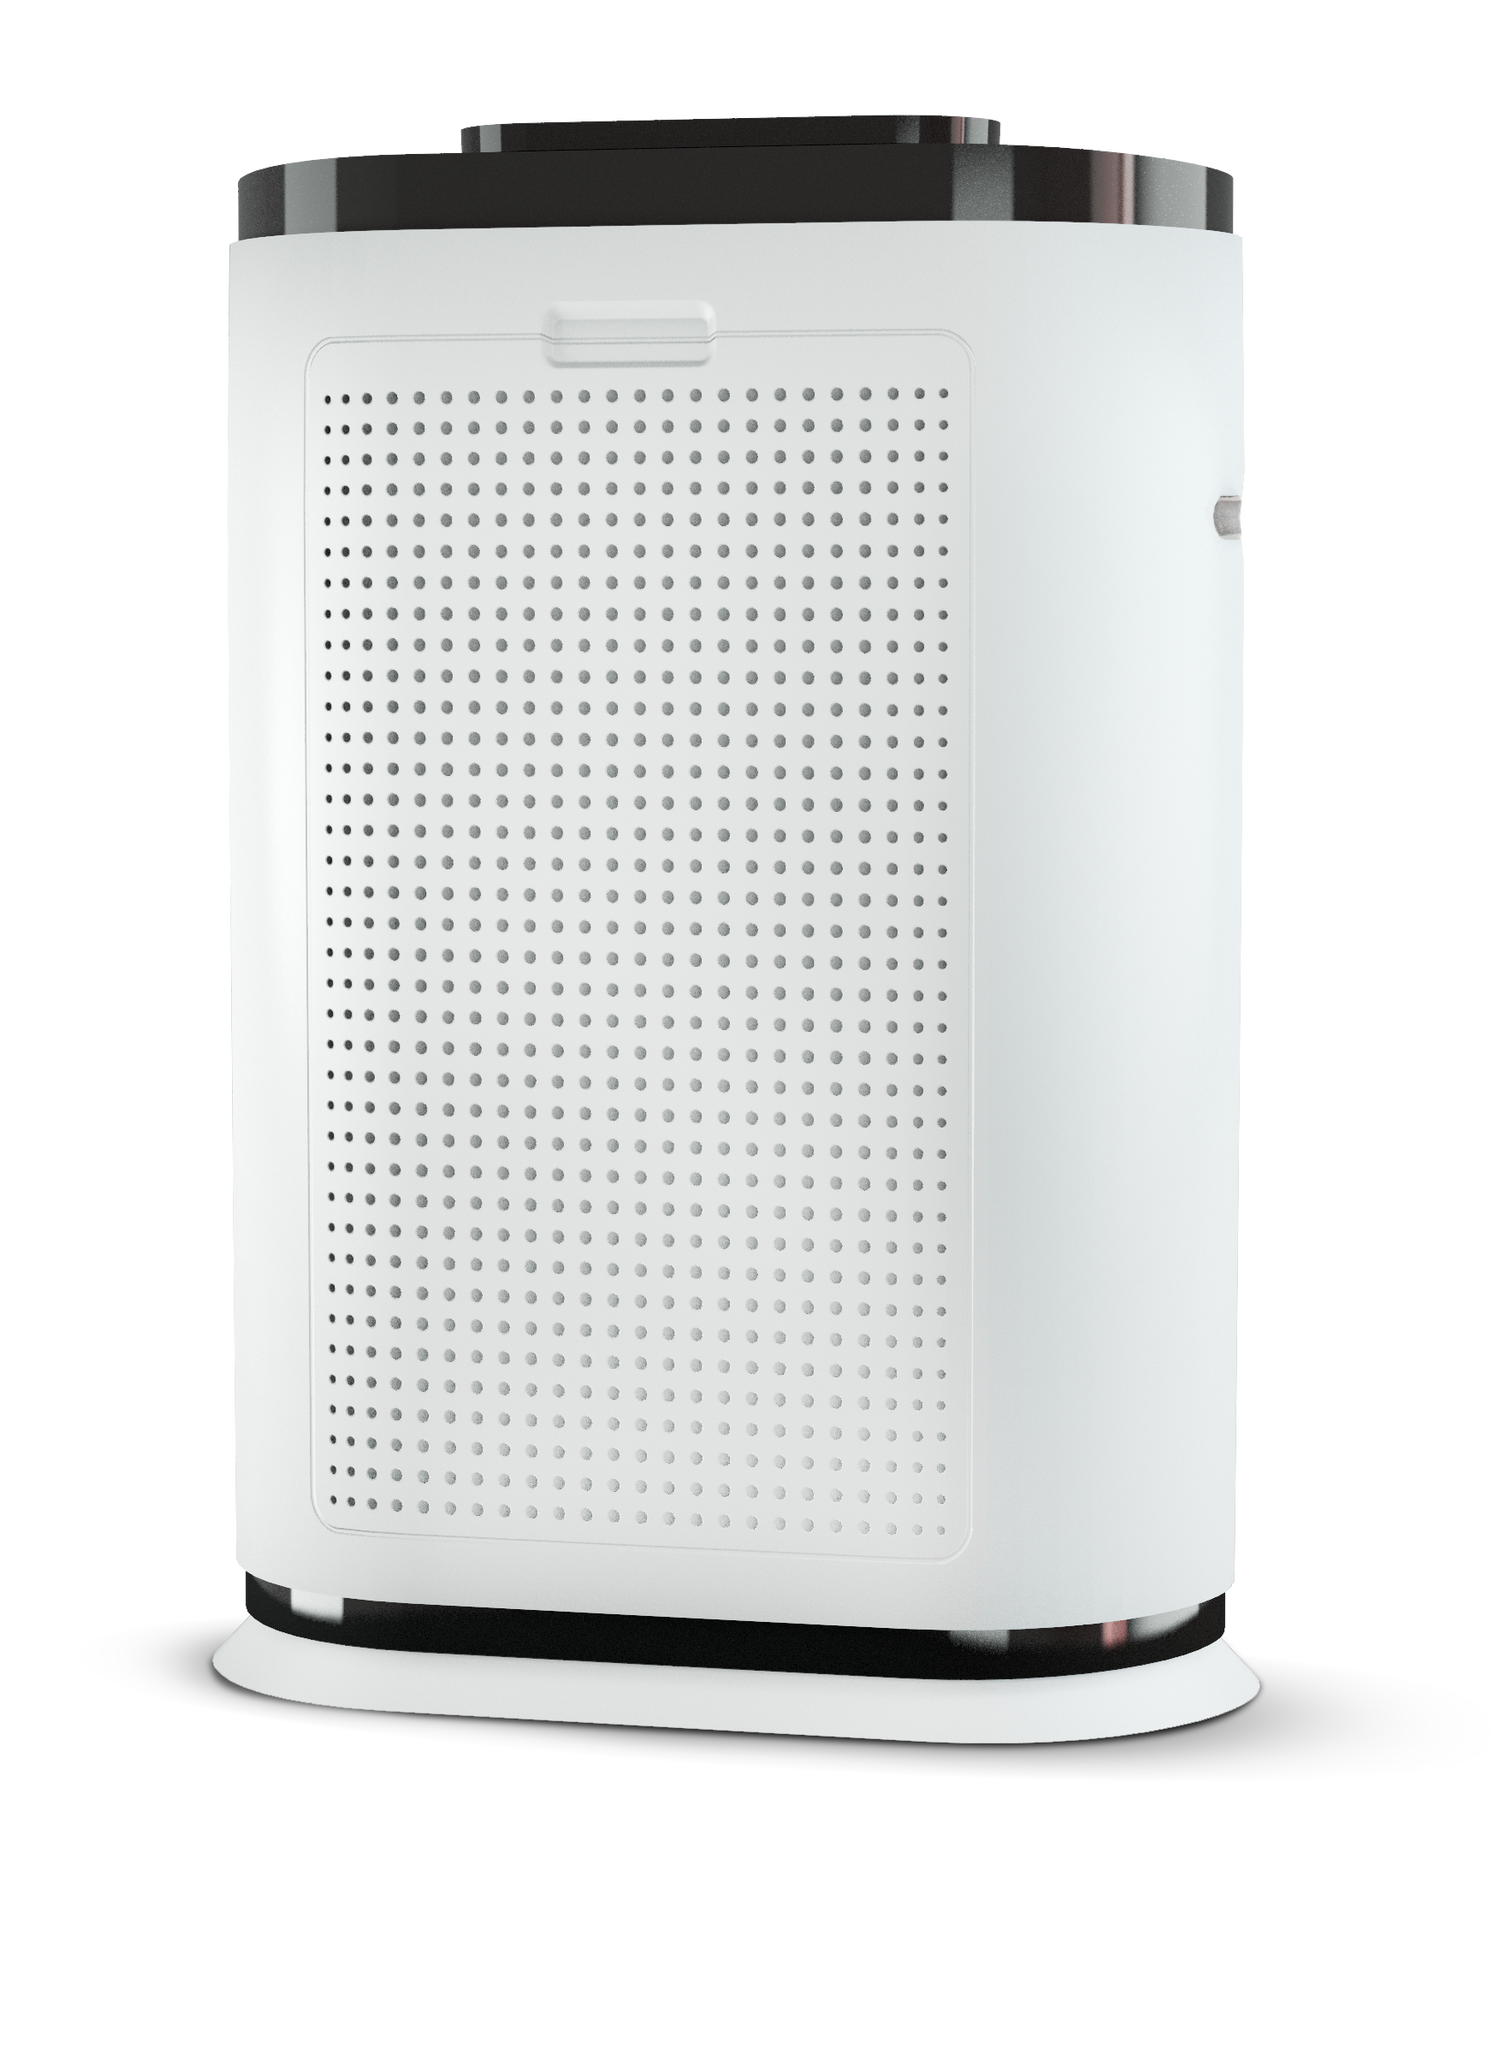  Breathe+ Pro Smart Air Purifier, H13 True HEPA Filter and  Antimicrobial Graphene Filter  1500 sq ft Coverage, Eliminates 99,97% of  Allergens, Smoke Dust Pet Dander, VOCs, Odor, Bacteria and Viruses 